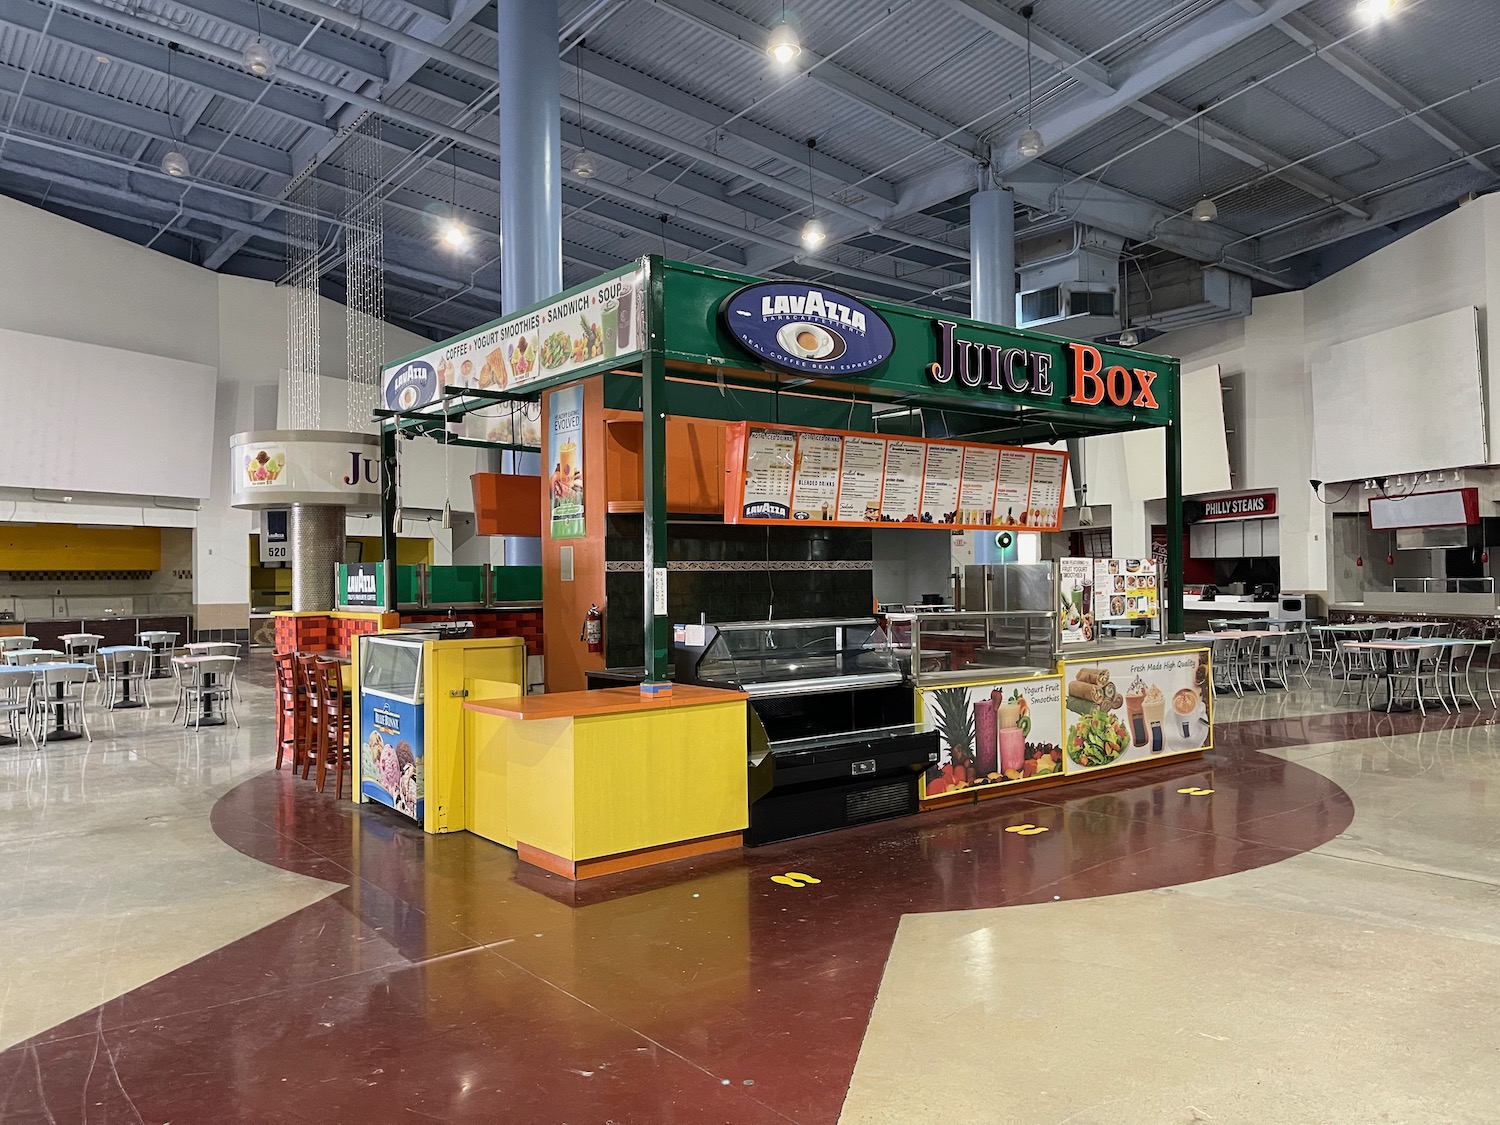 a food stand inside a building